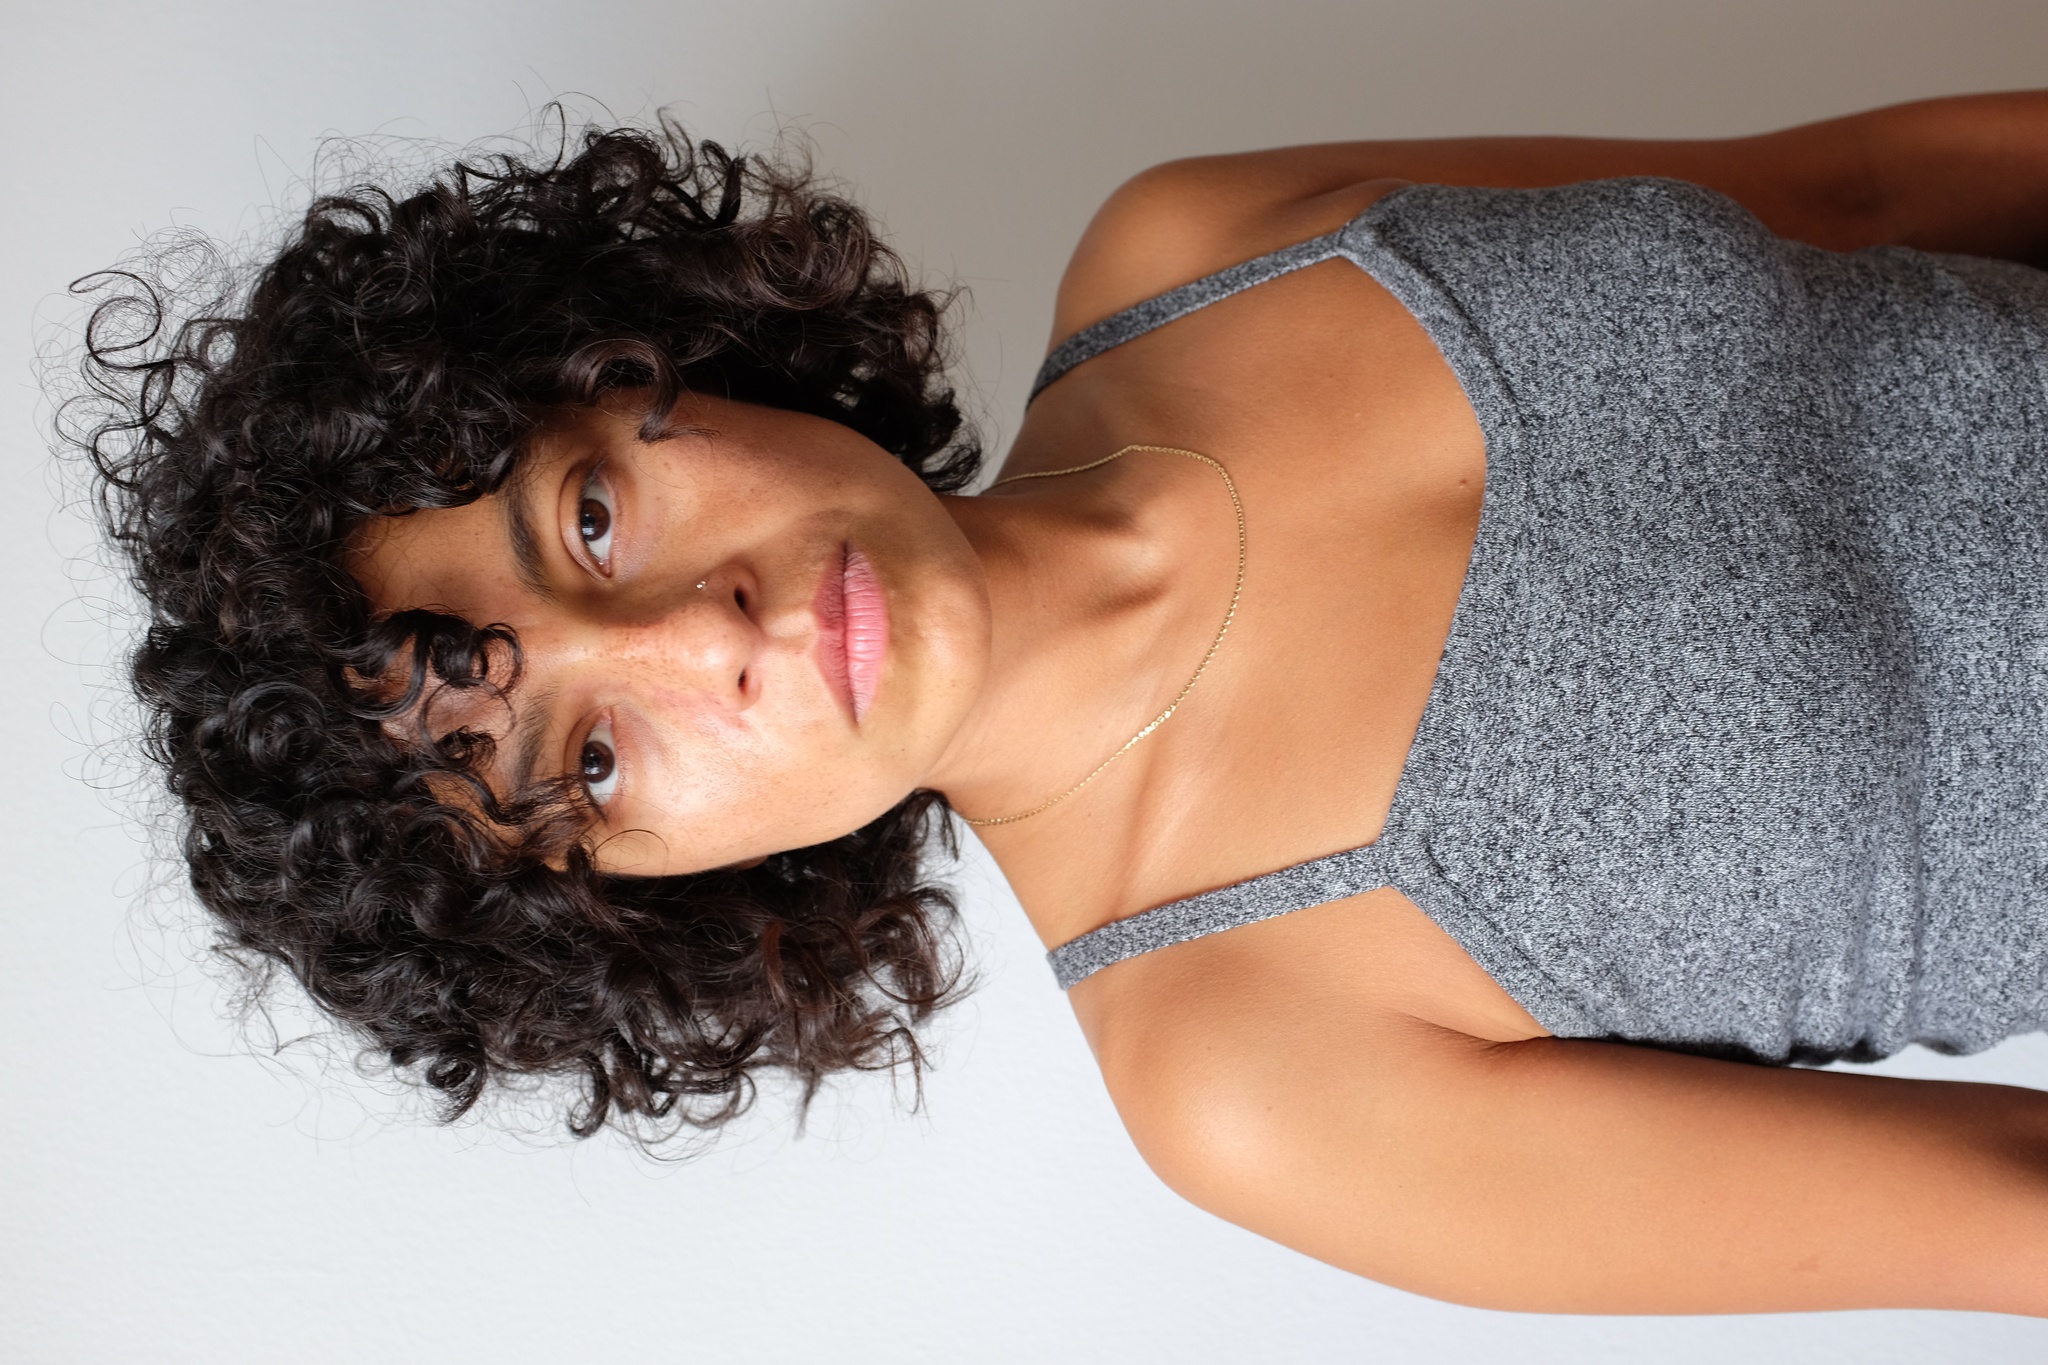 A portrait of the artist Mariana Valencia wearing a gray tank top and with dark curly hair